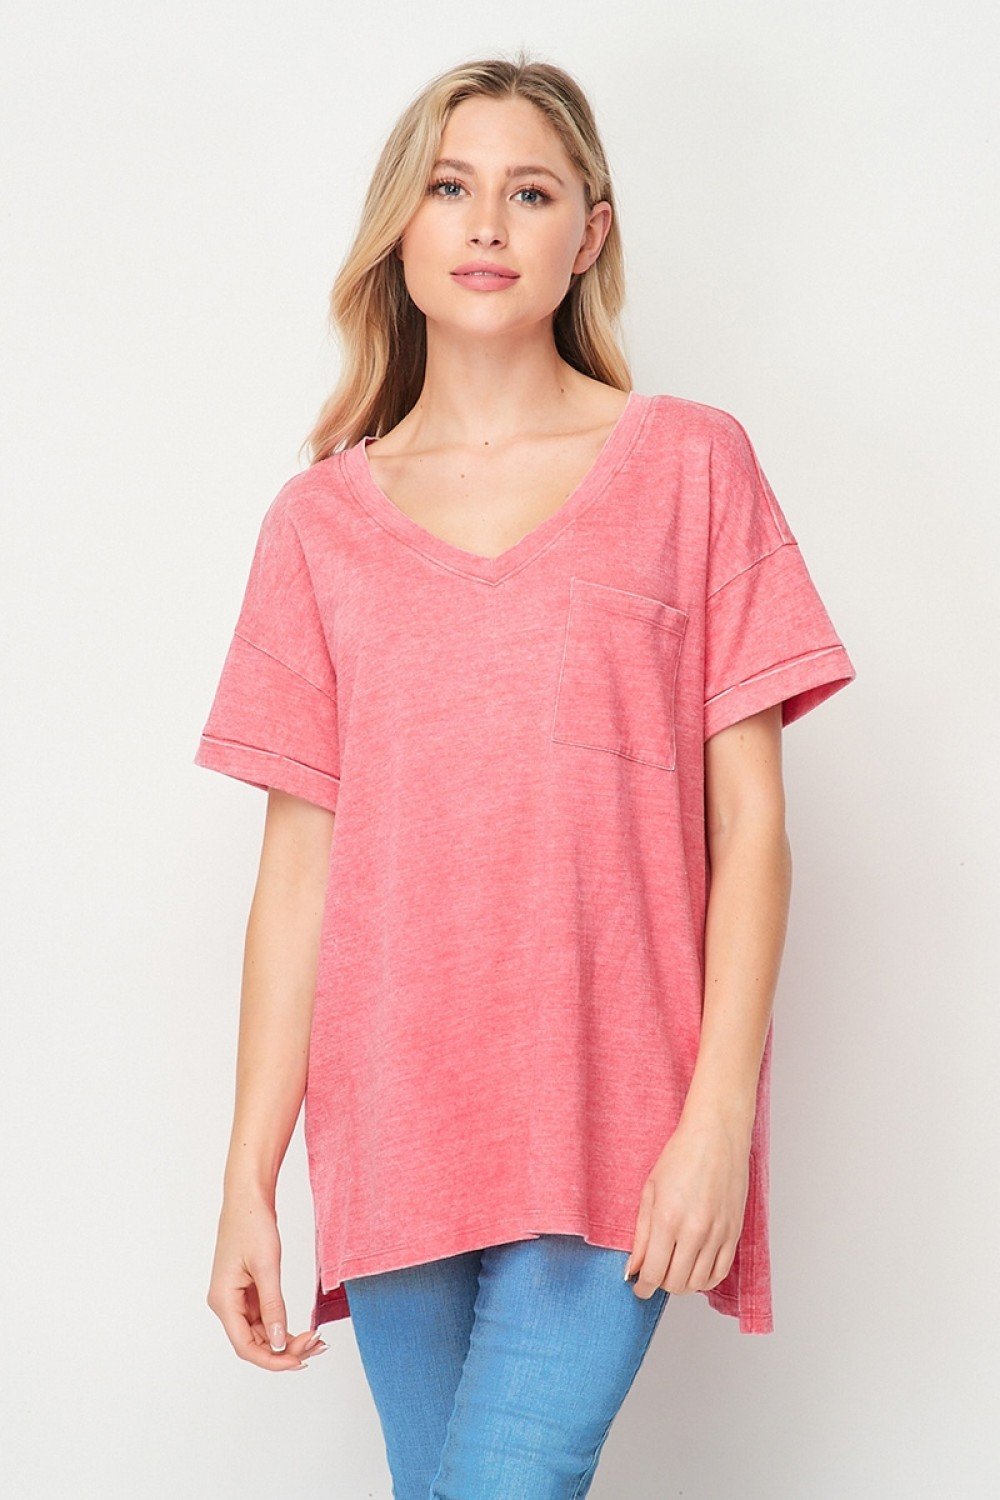 Mineral Wash Cuffed Sleeve Pocket Top  Ivy and Pearl Boutique Coral S 